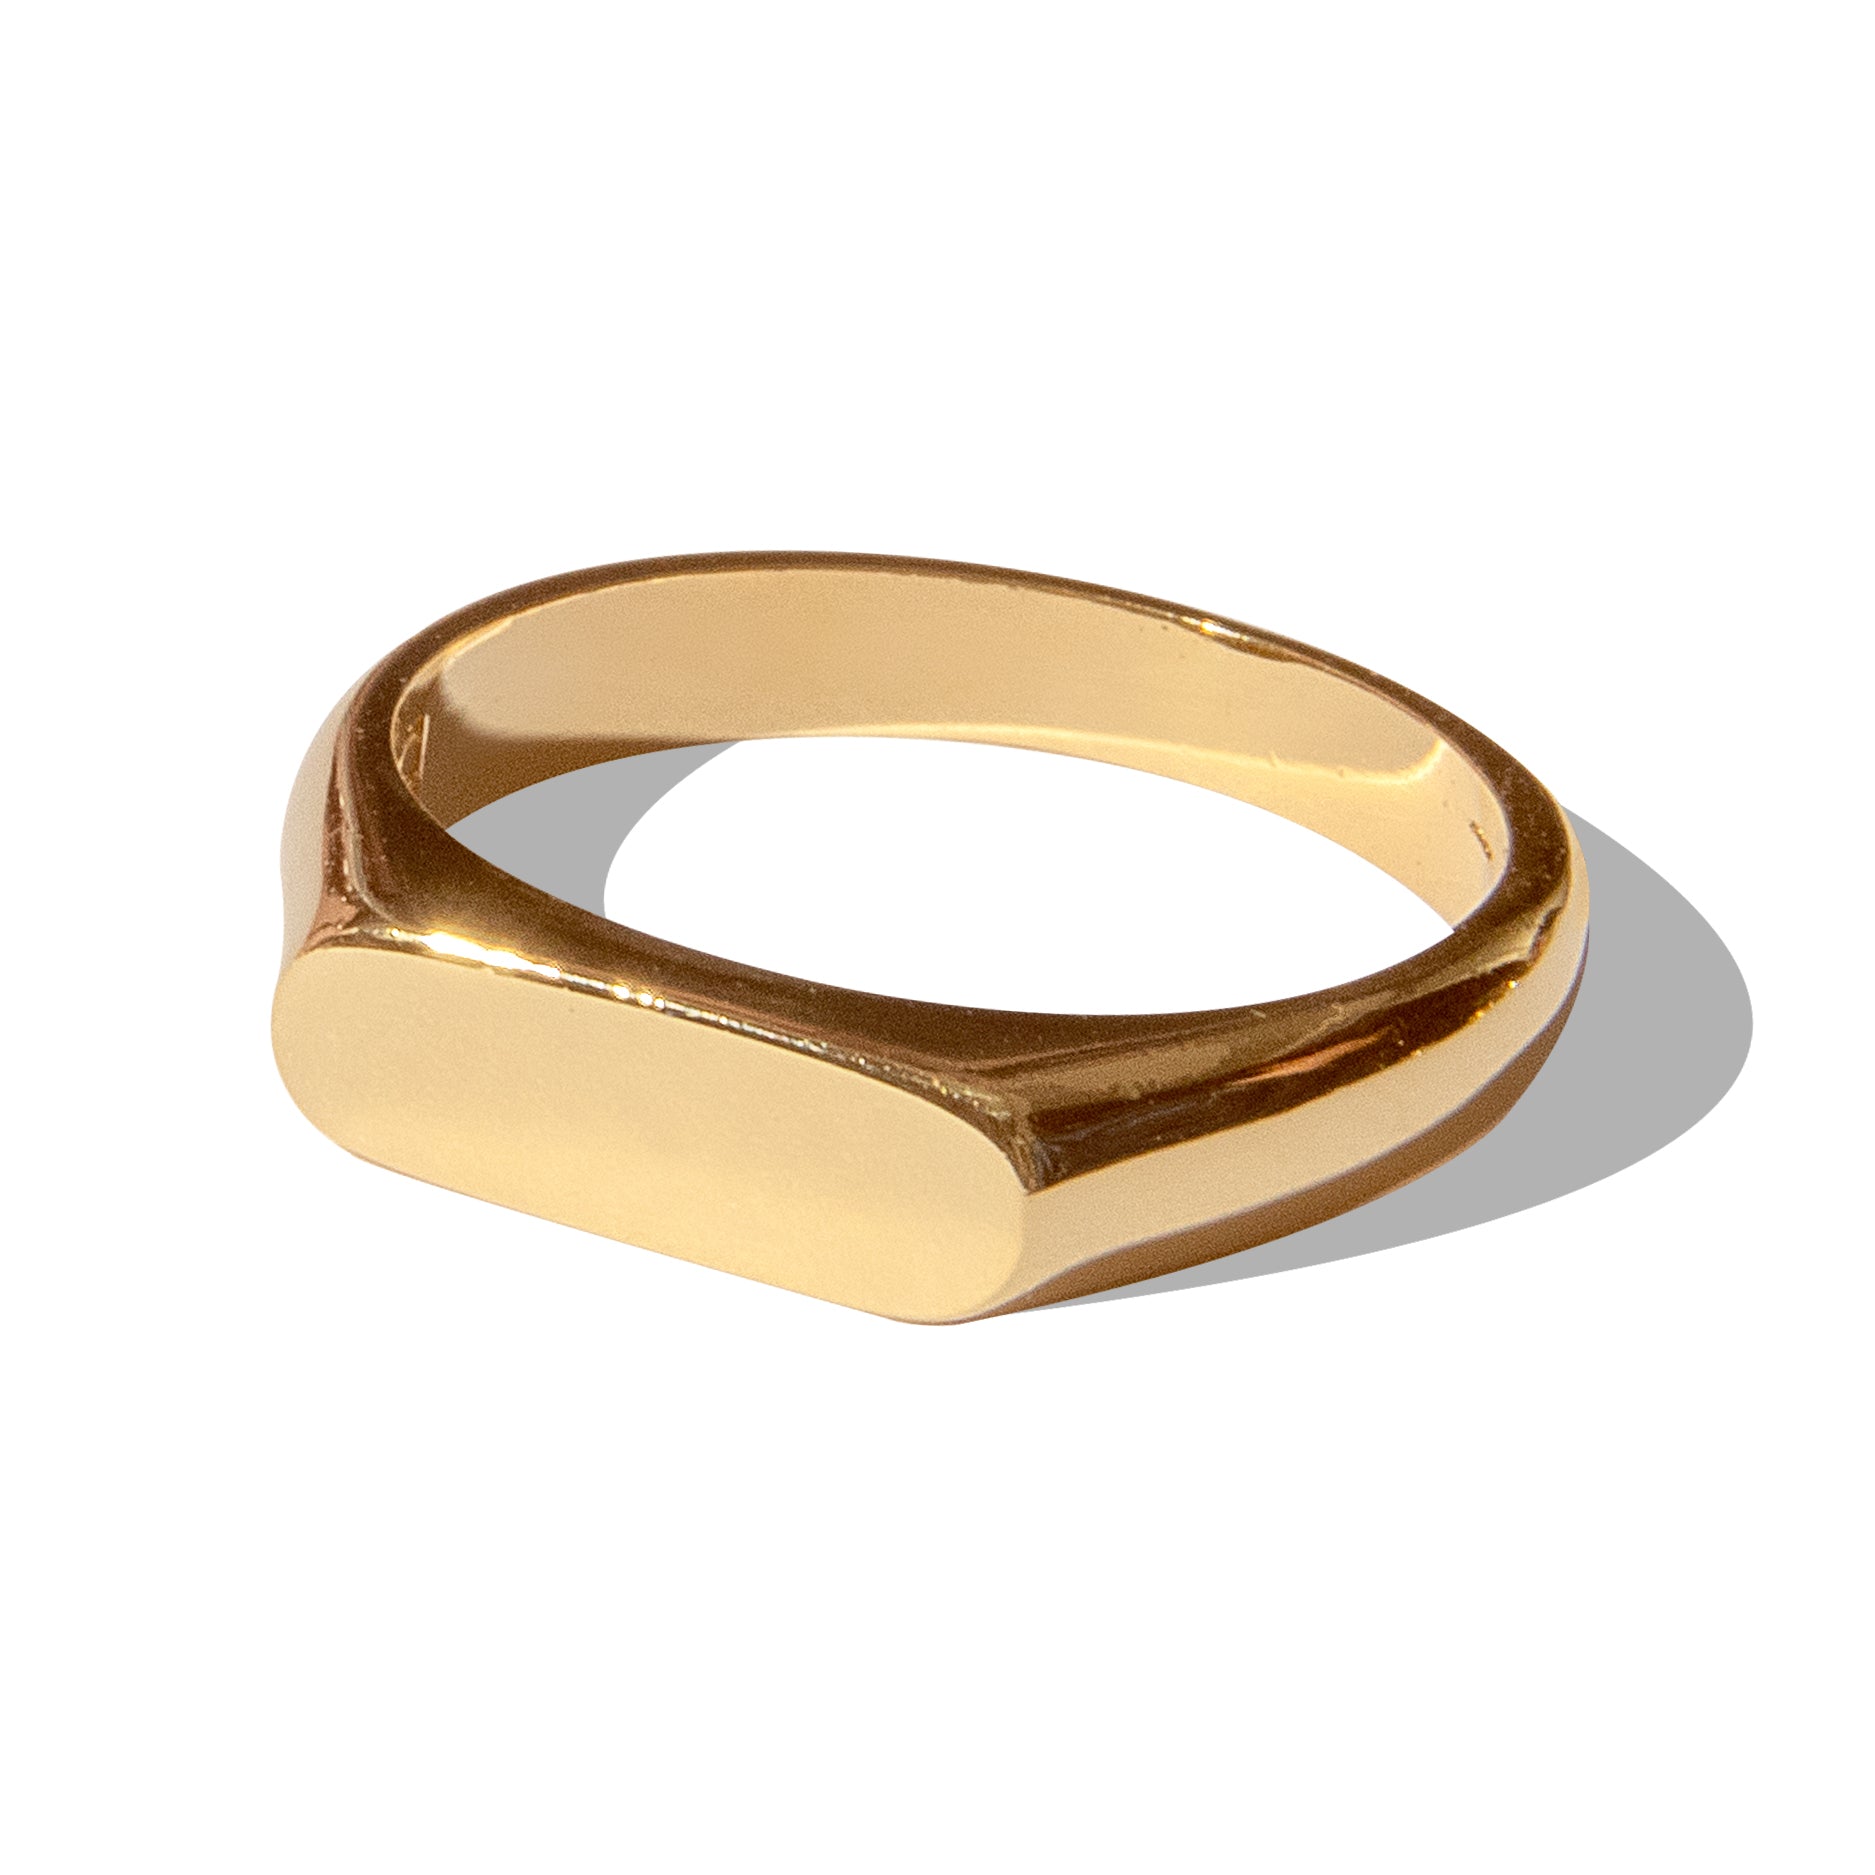 TOM - GOLD PLATED RING